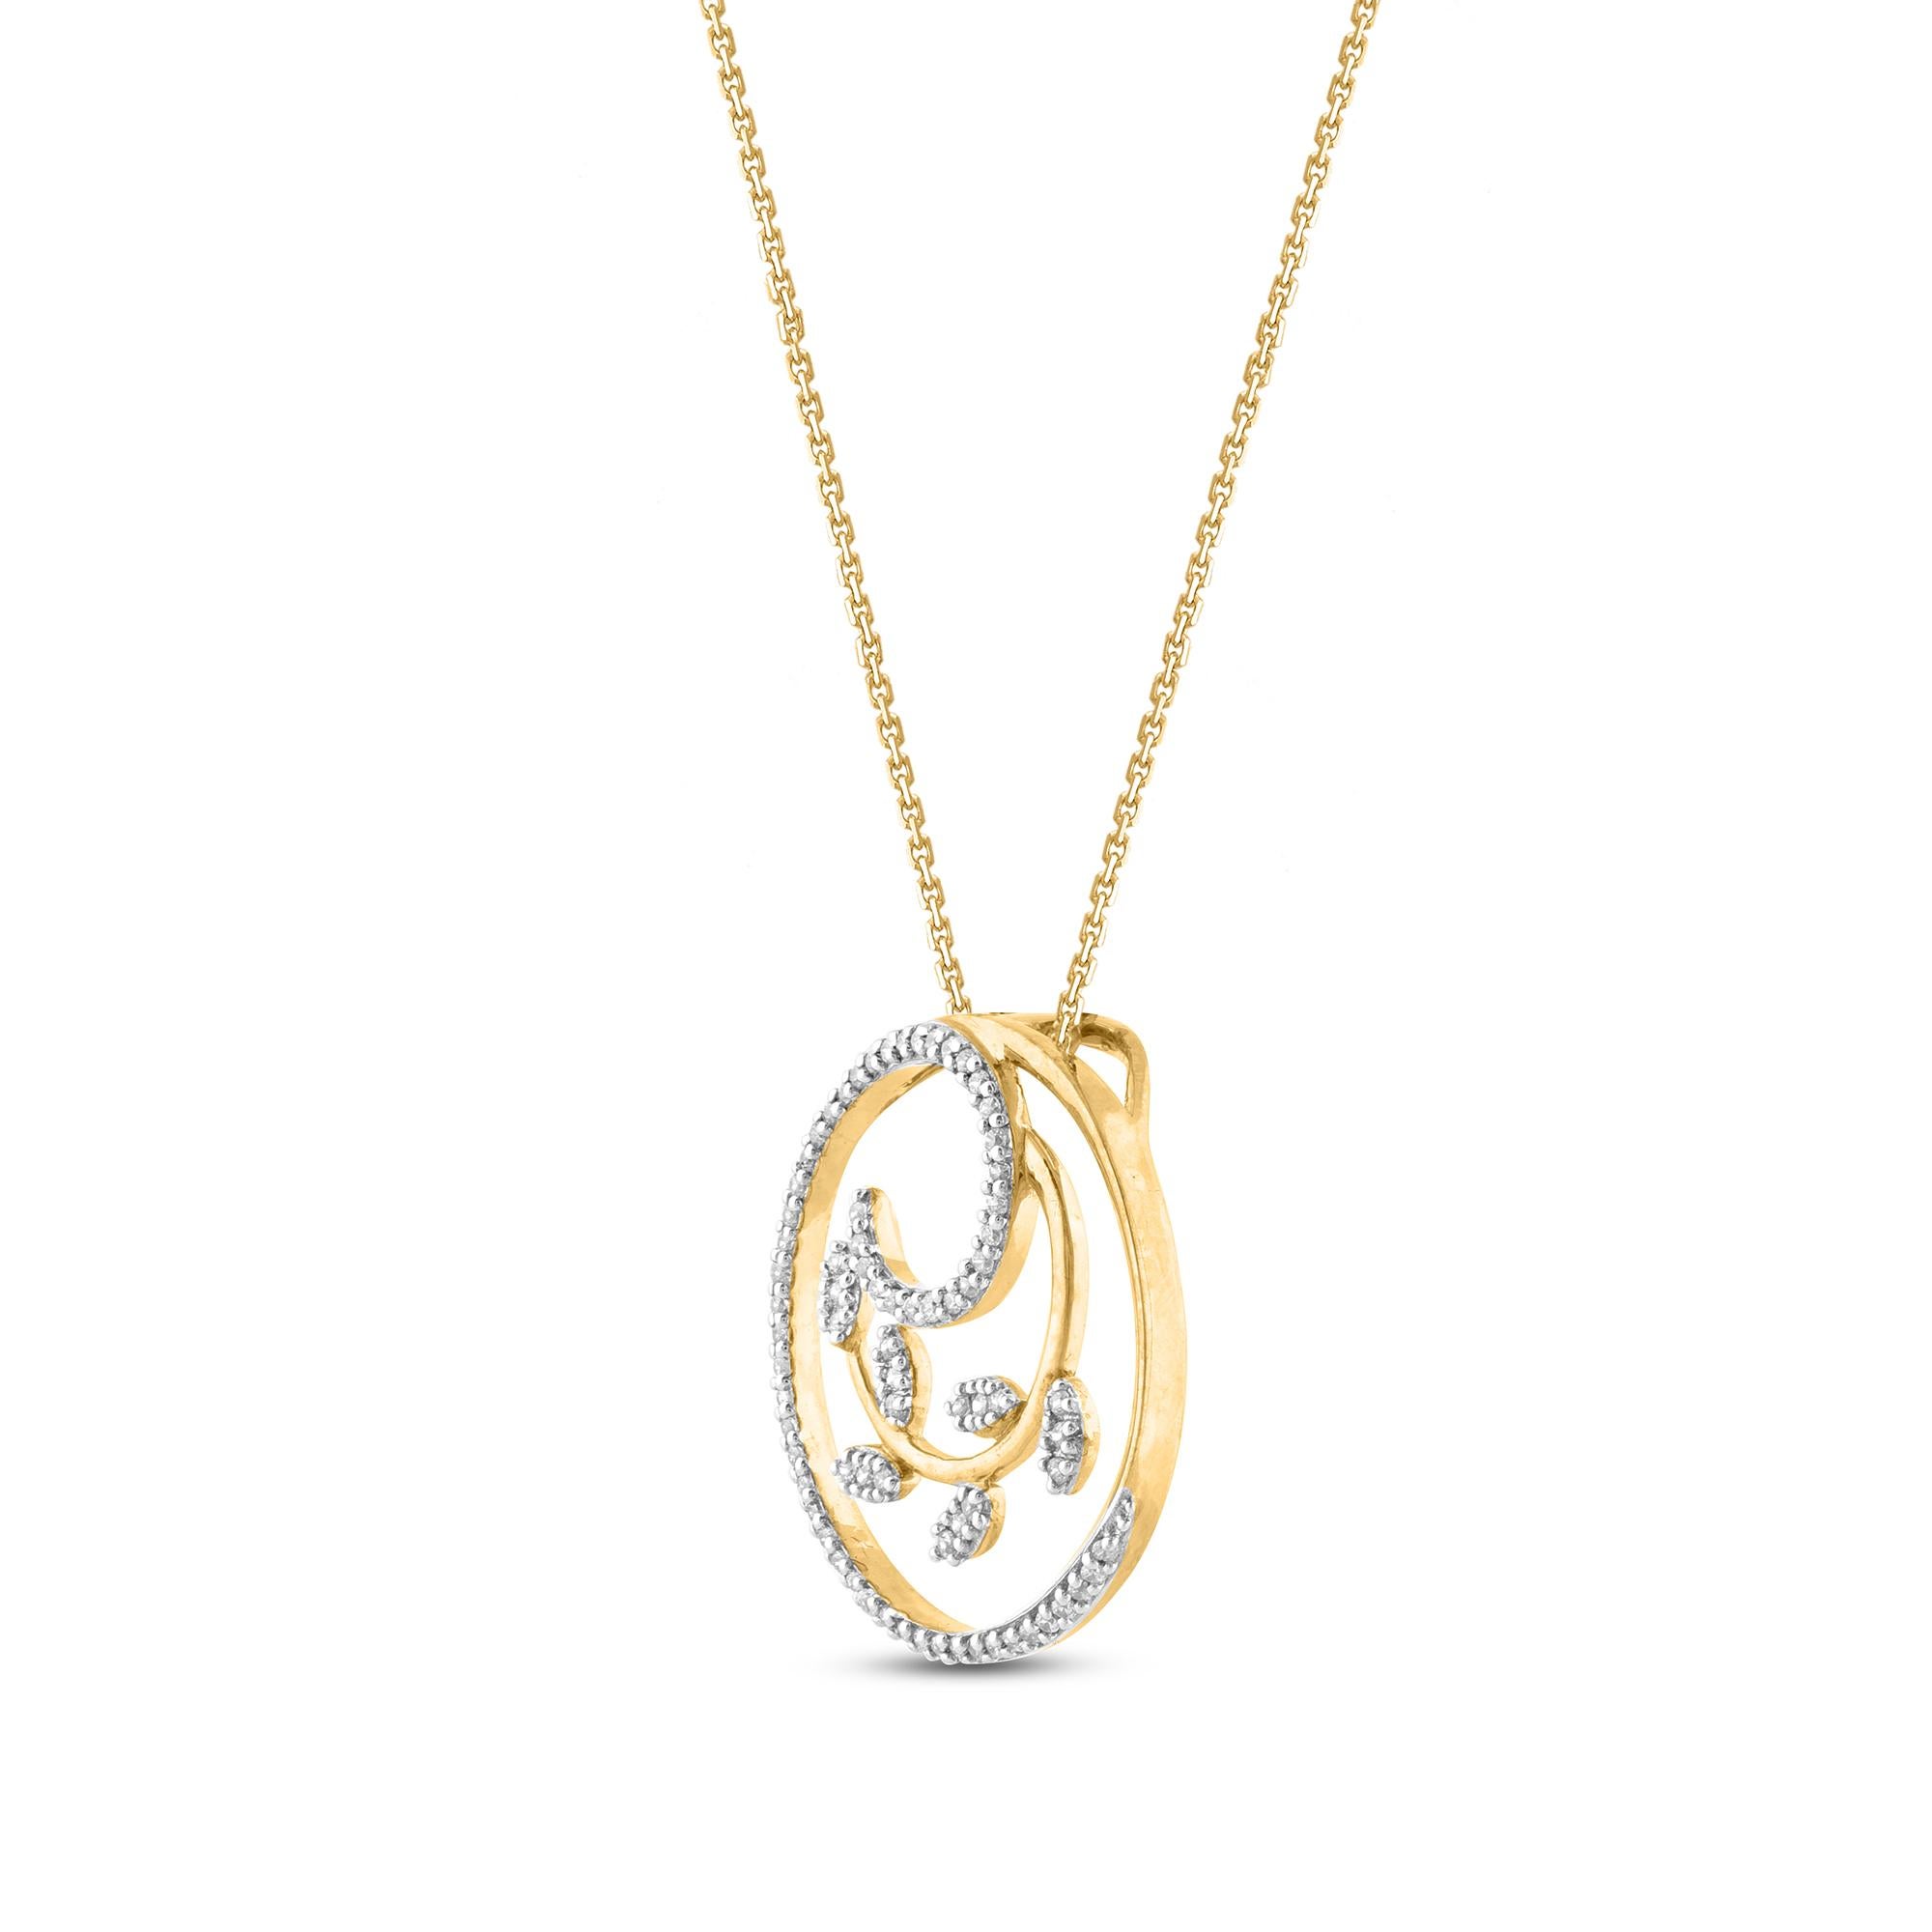 Bestow a timeless look when you choose this encircled leaf designer diamond pendant. The total diamond weight is 0.15 carat and shines in H-I color, I2 clarity. Beautifully crafted by our inhouse experts in 14 karat yellow gold and studded with 76